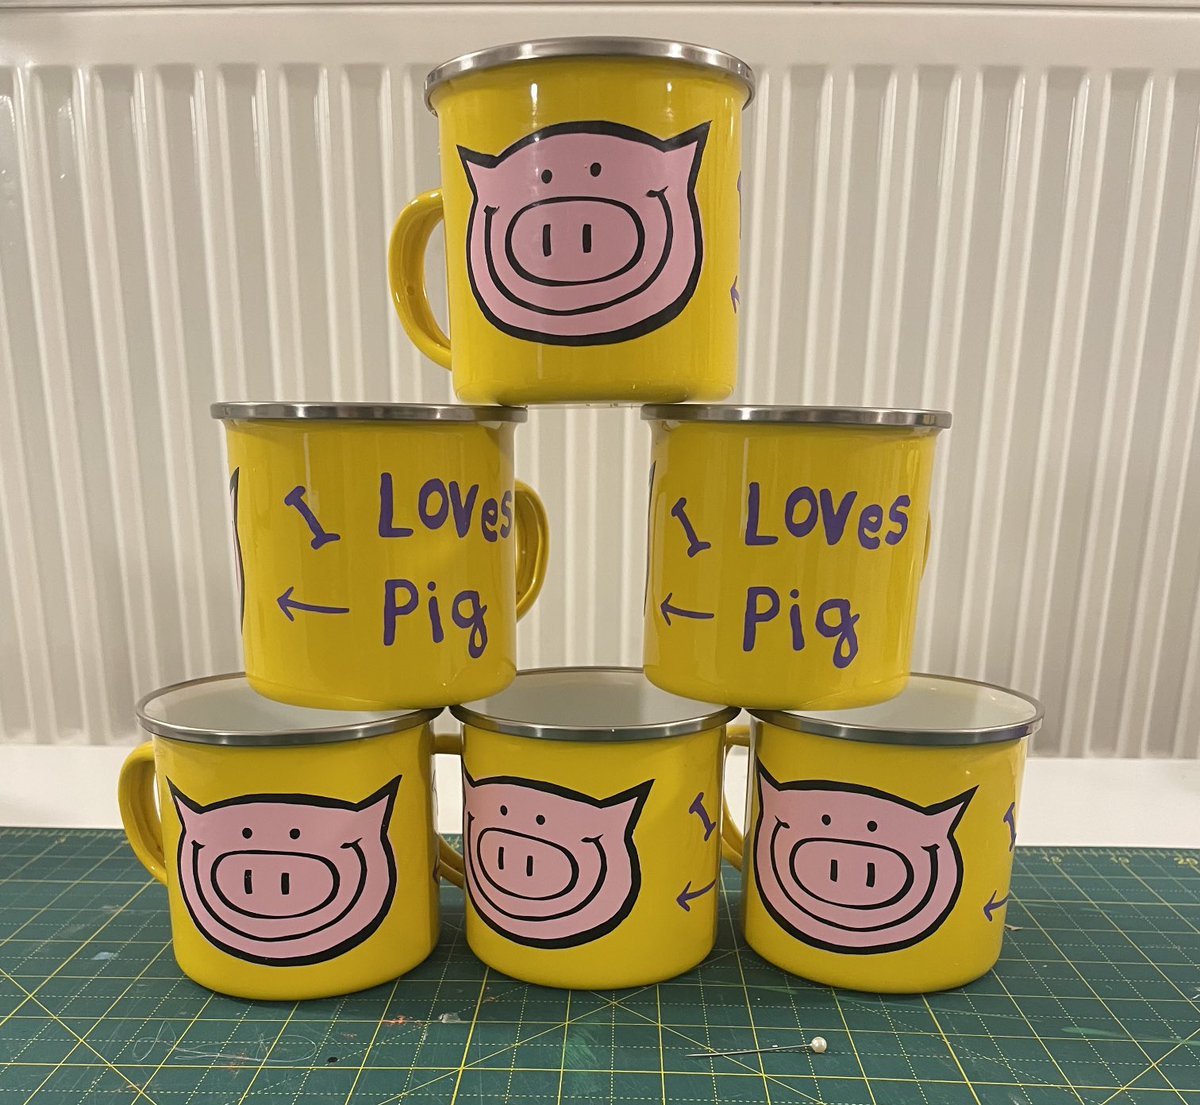 Ooh, a tin piggy mug or two, just in time for Xmas. Head on over to diaryofpig.com and take a look in Pig’s shop. These corkers are a purse pleasing £6!!!